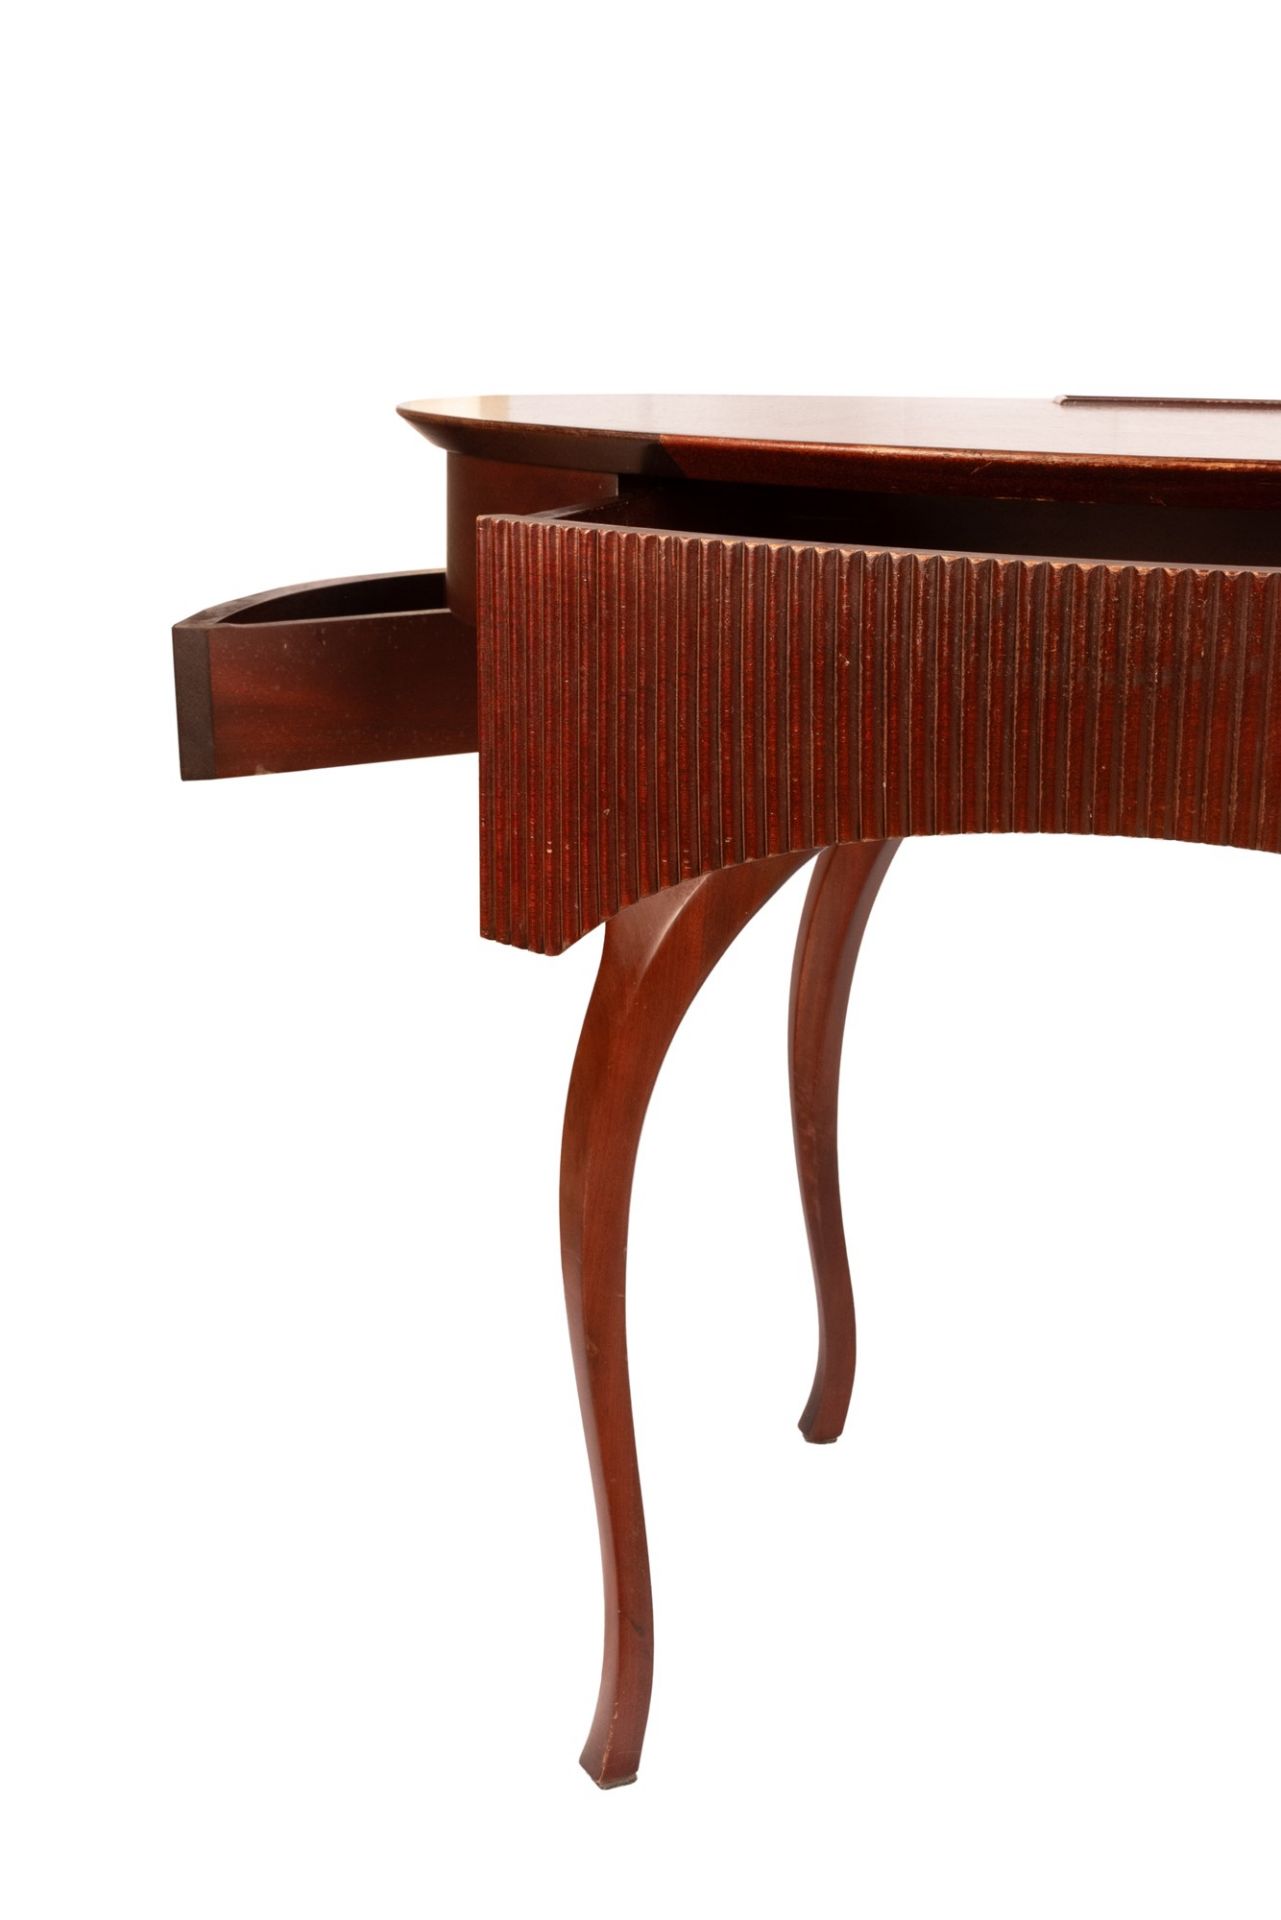 Writing desk in cherry wood - Image 12 of 25